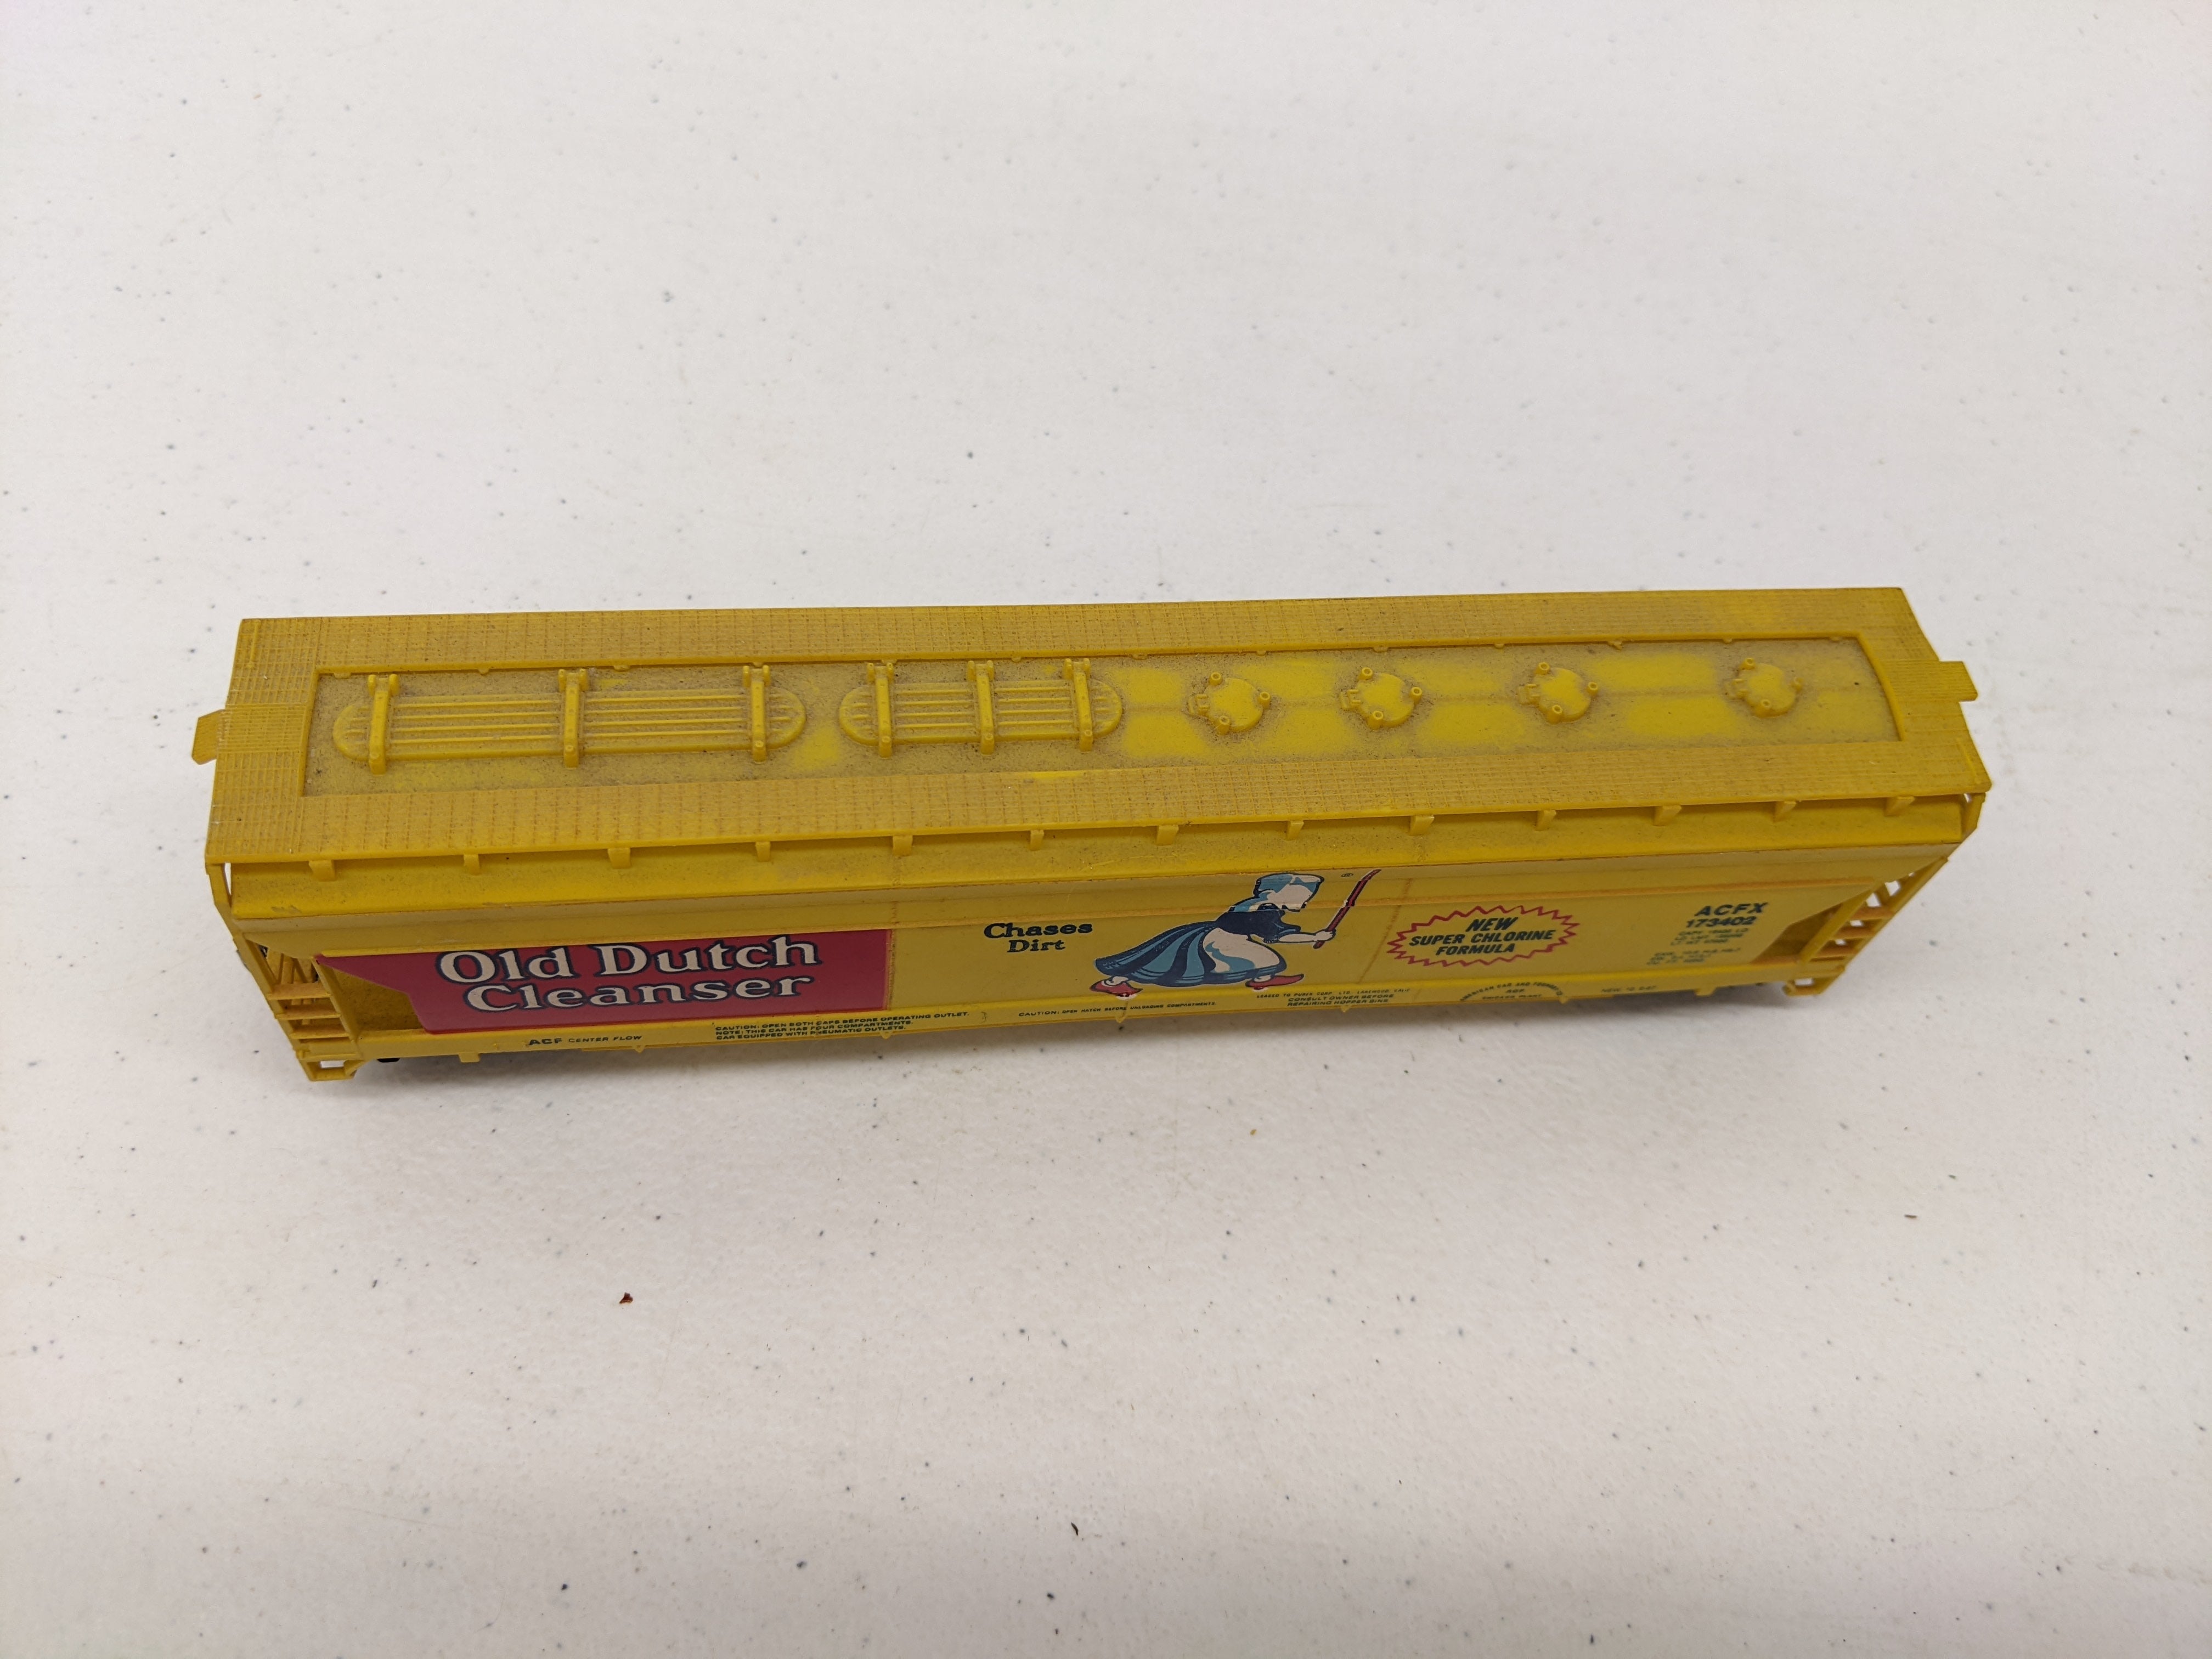 USED Tyco HO Scale, ACF Center Flow Hopper Car, Old Dutch Cleanser ACFX #173402